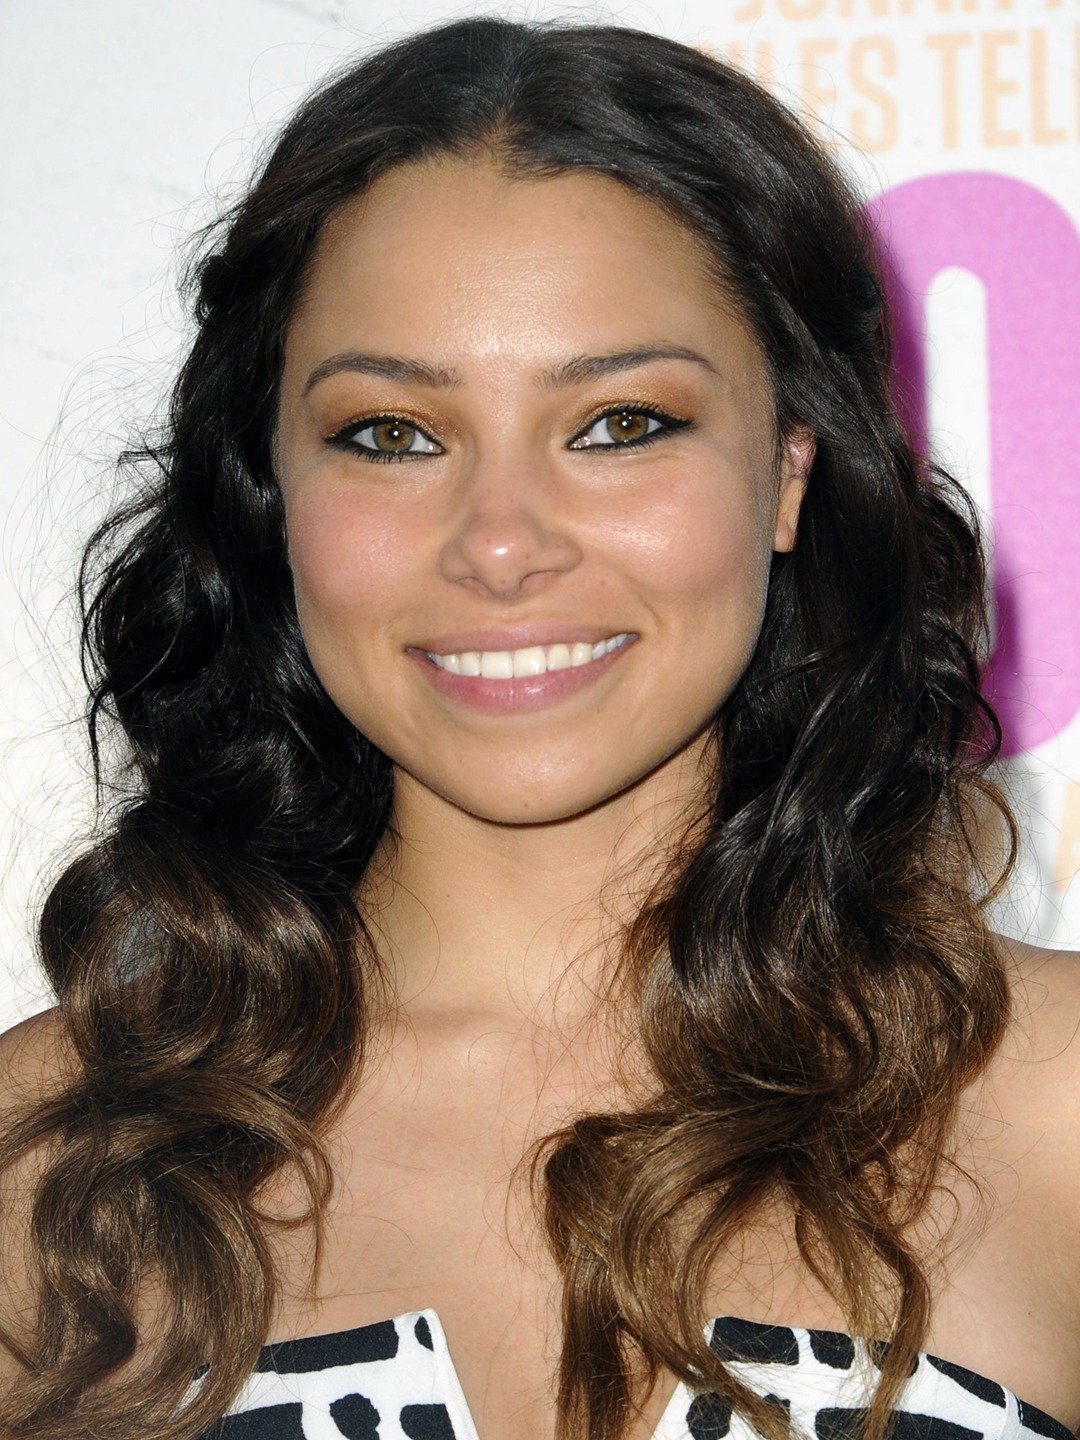 How tall is Jessica Parker Kennedy?